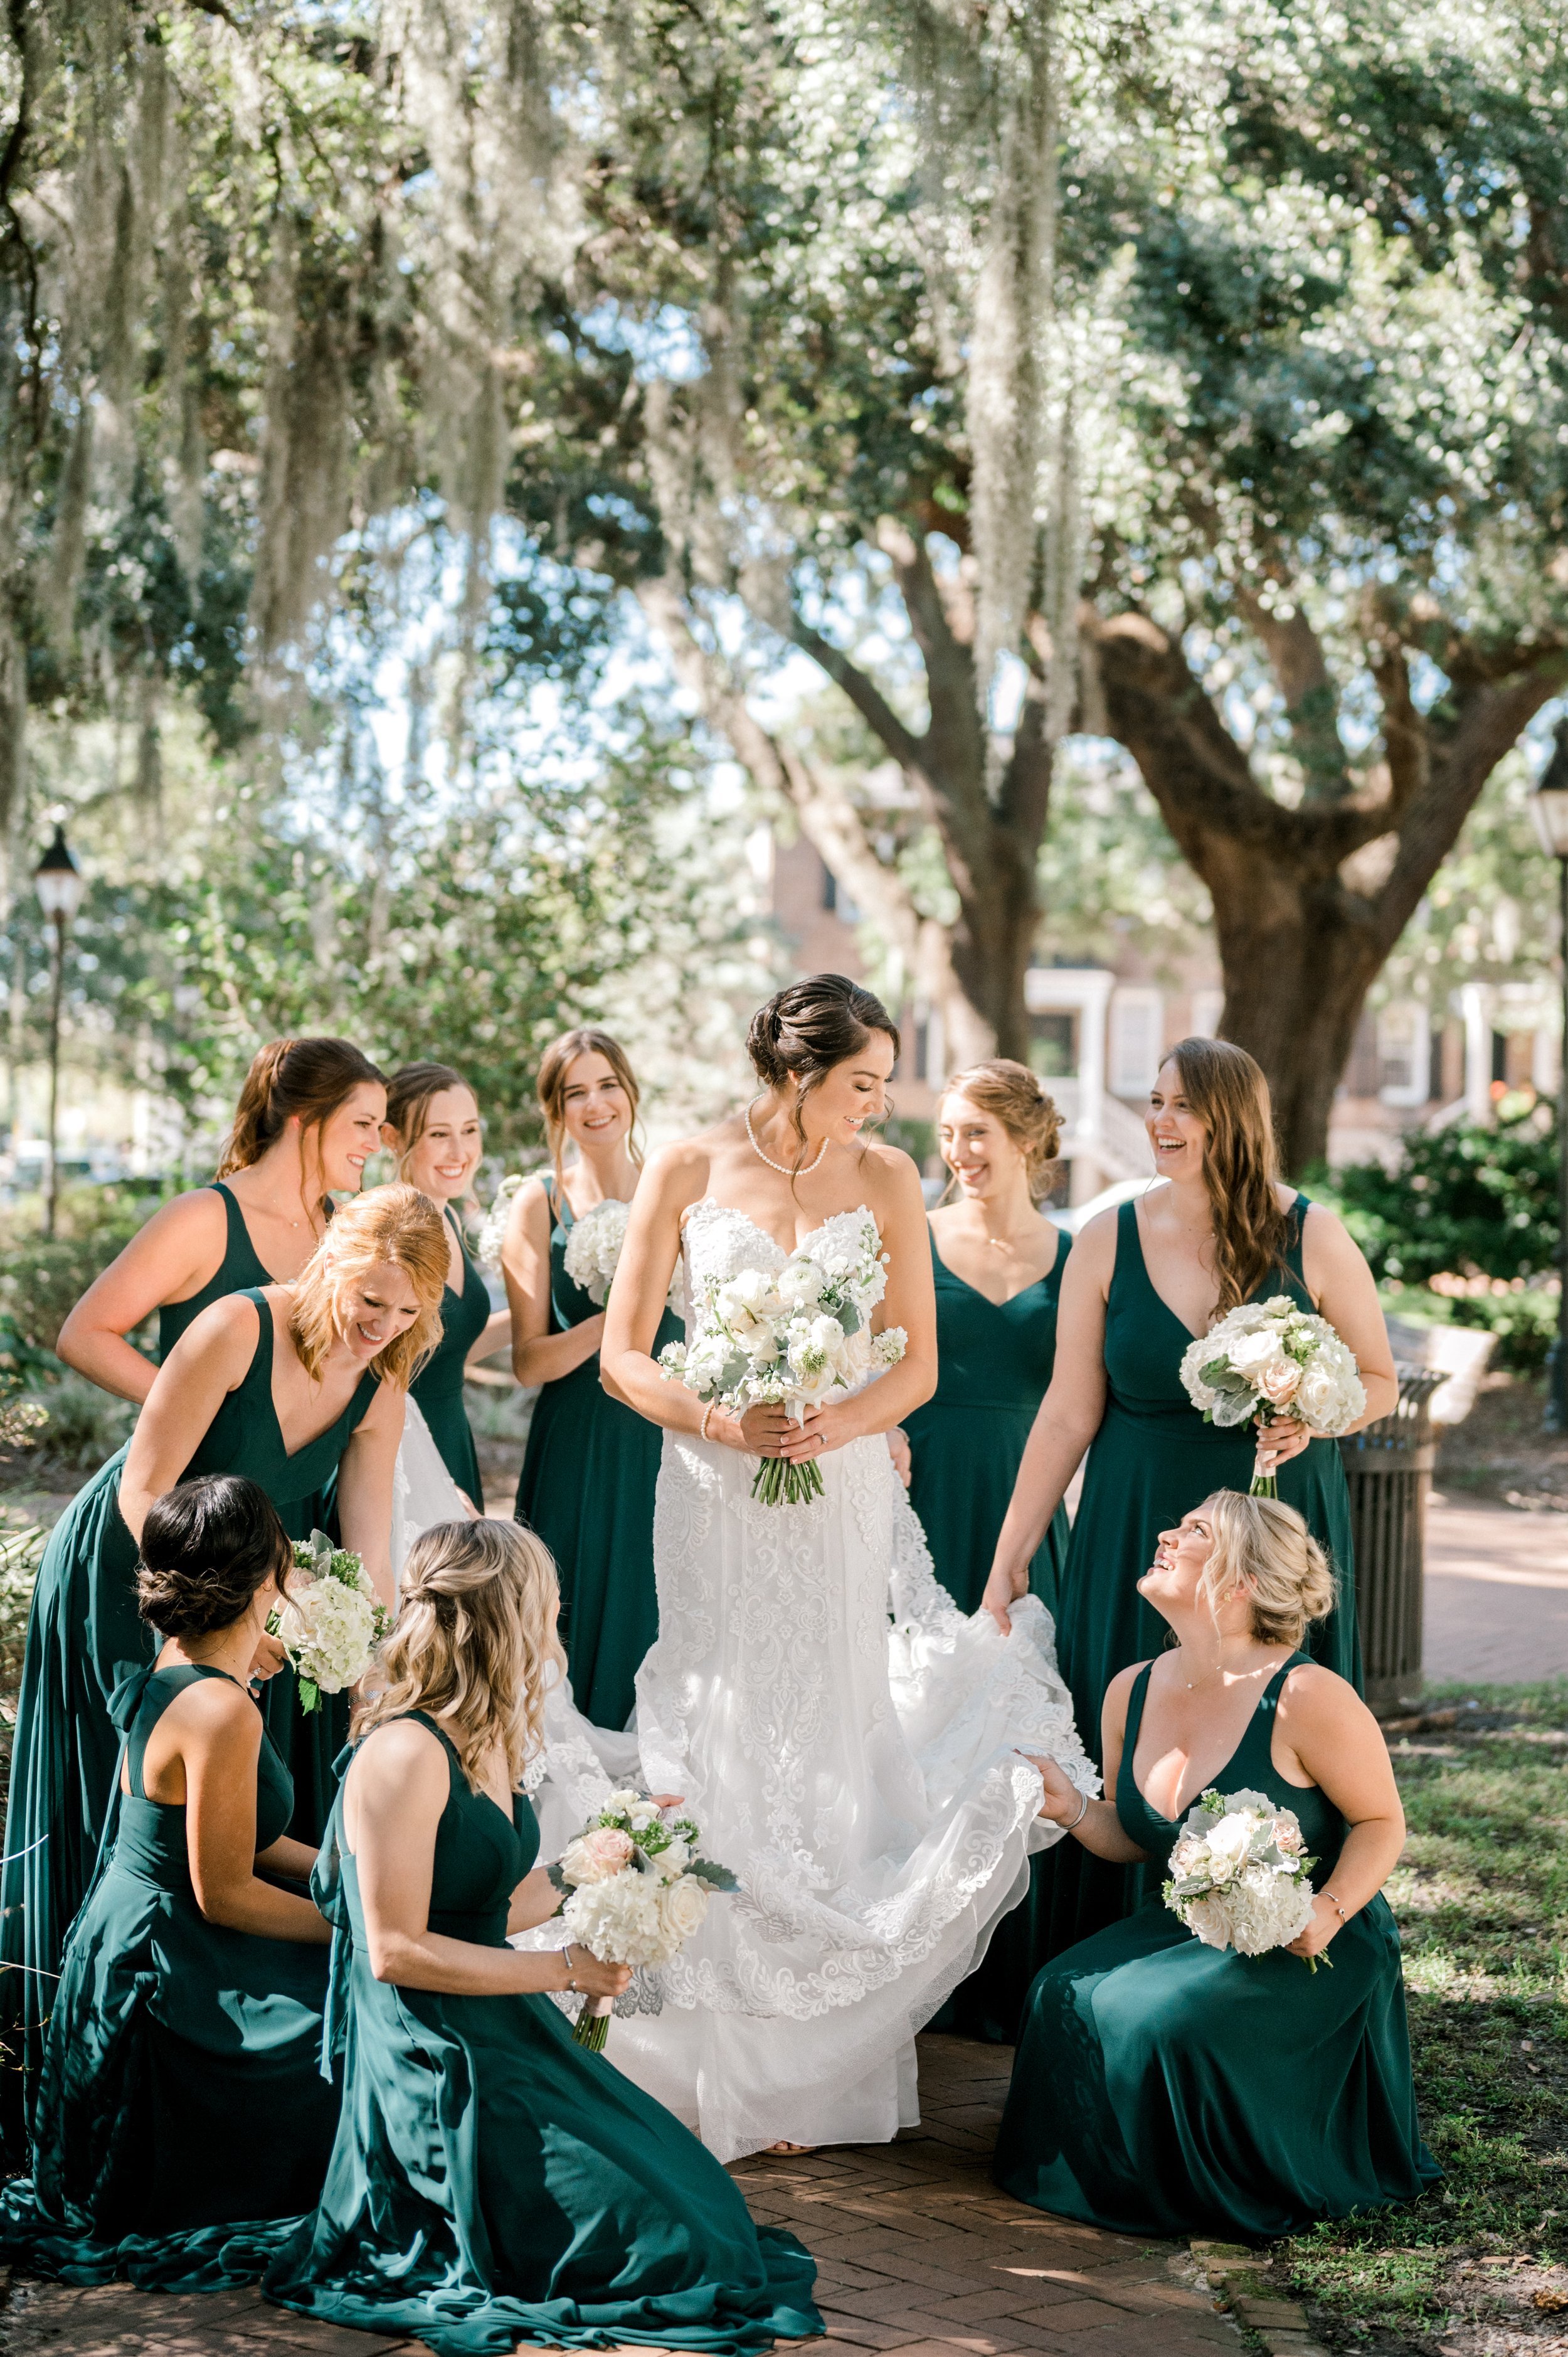 ivory-and-beau-blog-down-for-the-gown-grayson-real-bride-real-wedding-blog-southern-bride-maggie-sottero-wedding-dress-bridal-gown-wedding-gown-bridal-shop-bridal-boutique-savannah-georgia-Pinyan_0249.jpg